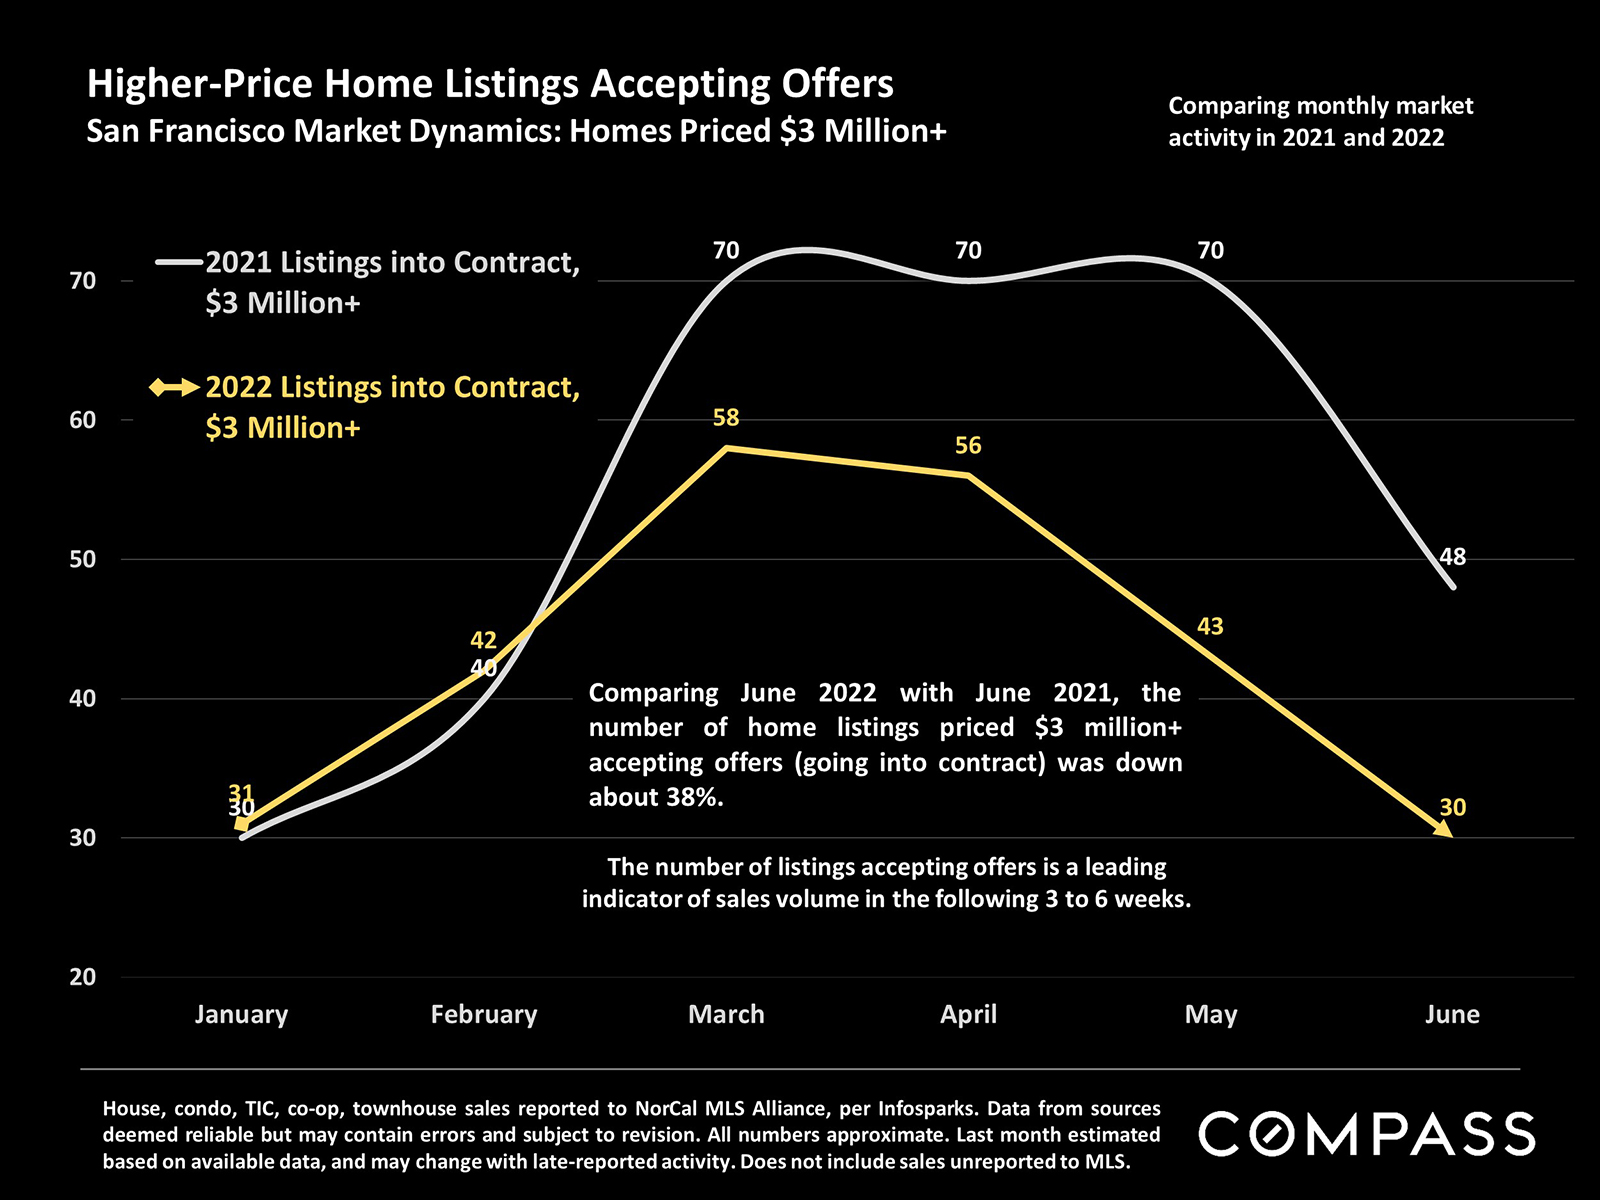 Higher Price Home Listings